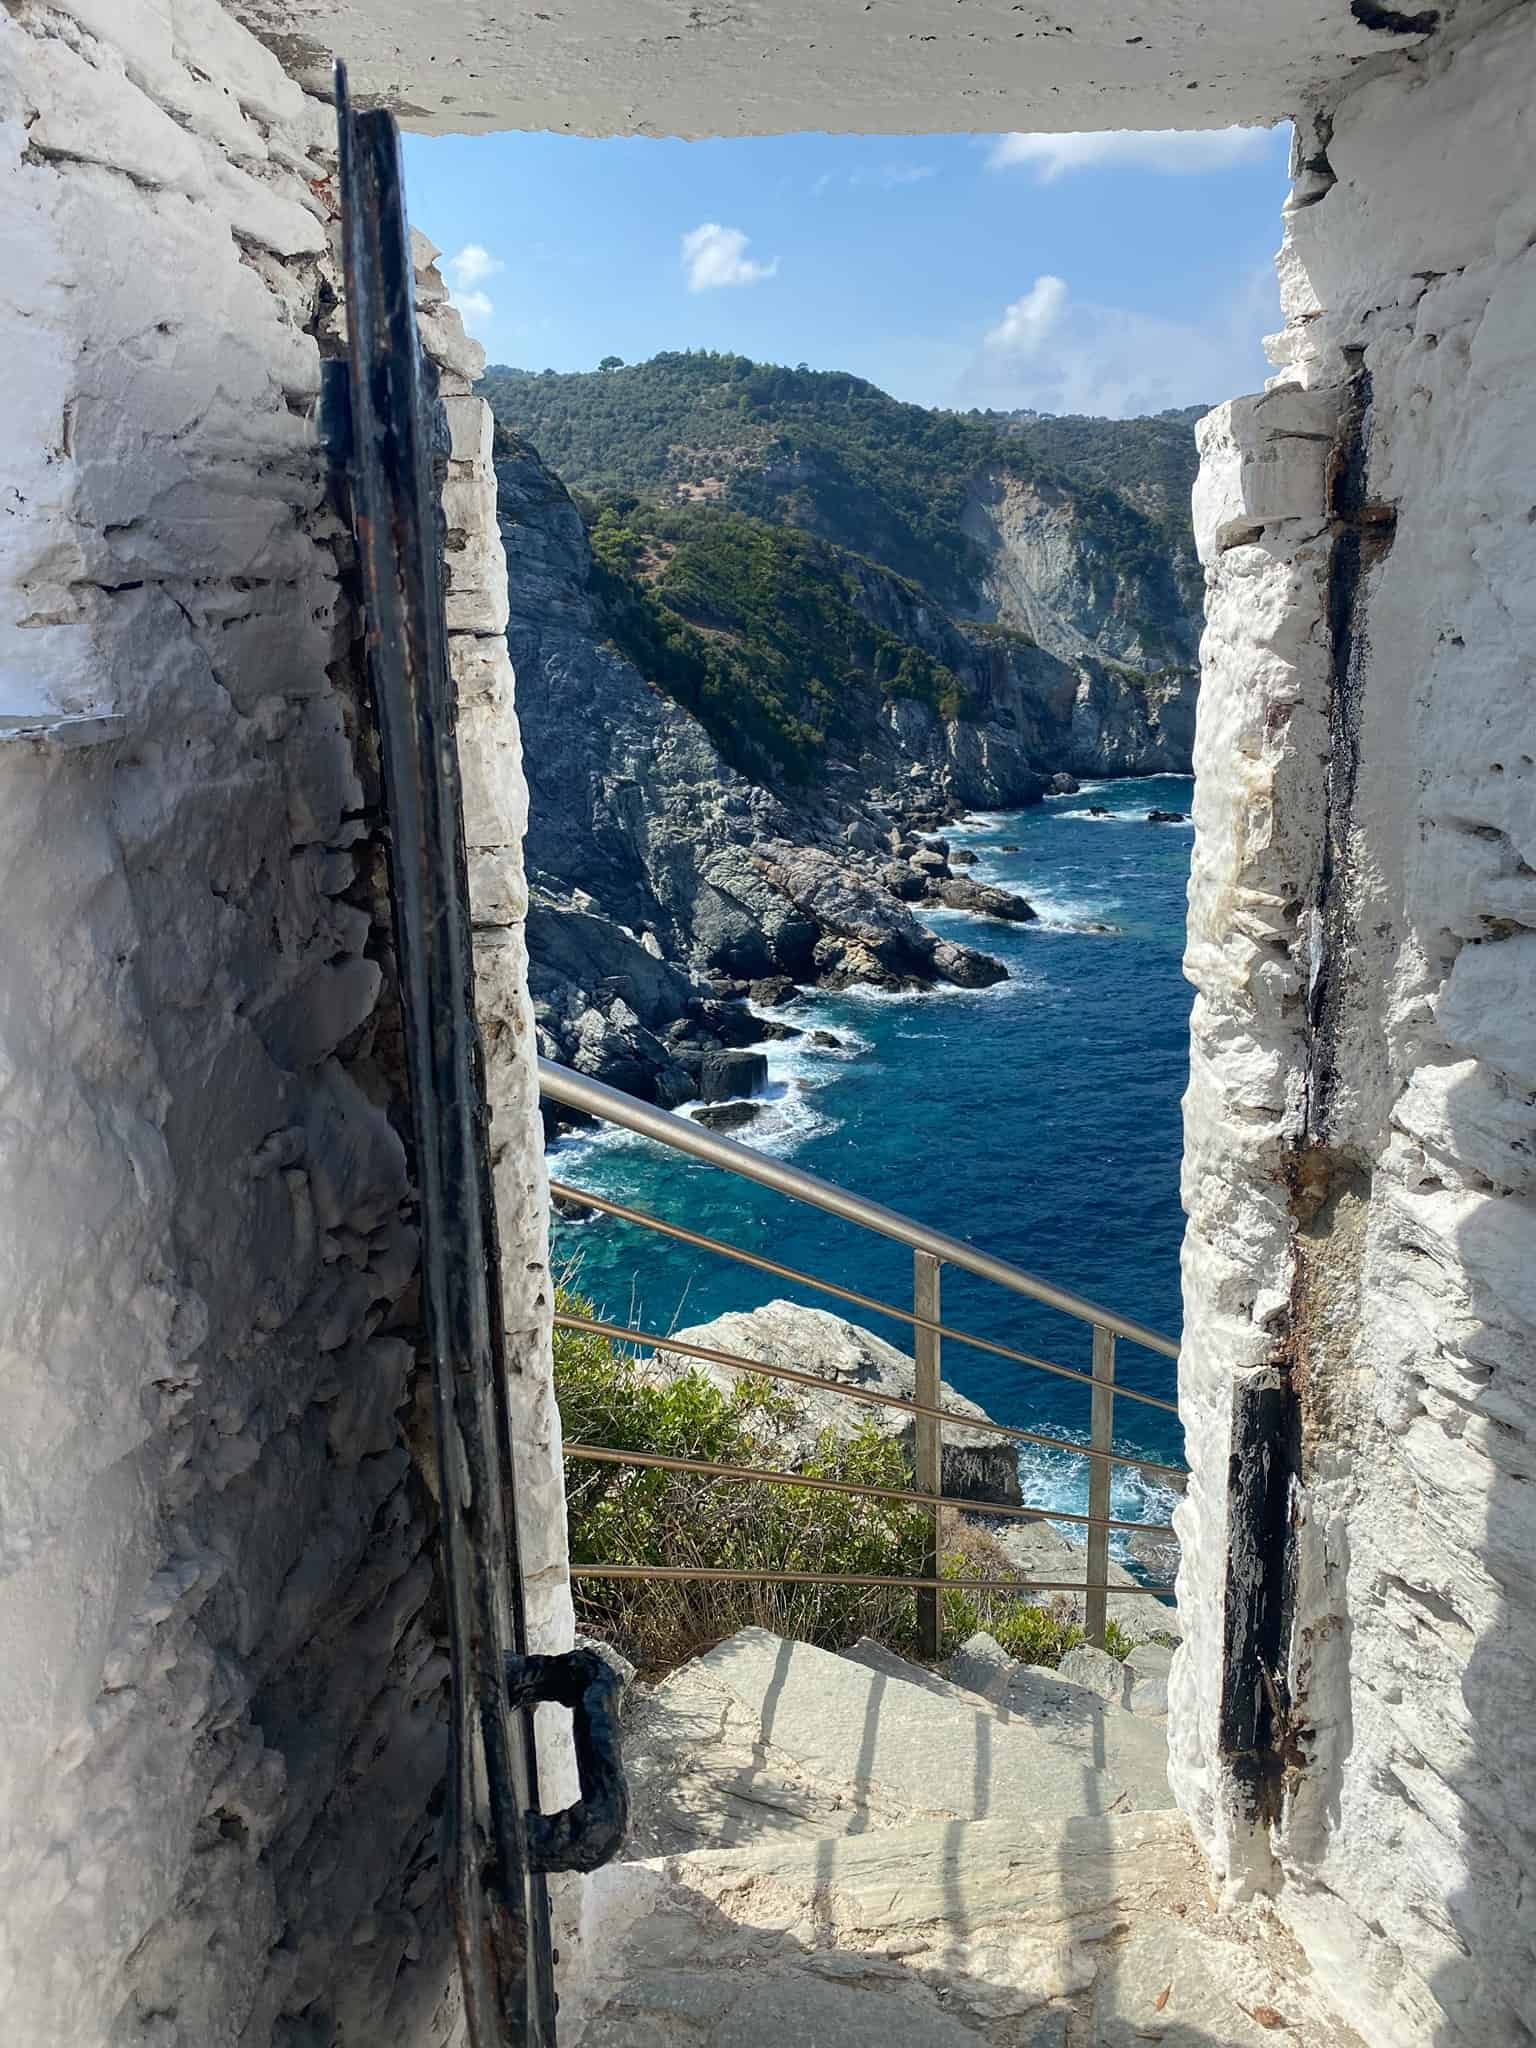 Looking out from the Mamma Mia church of Agios Ioannis Kastri